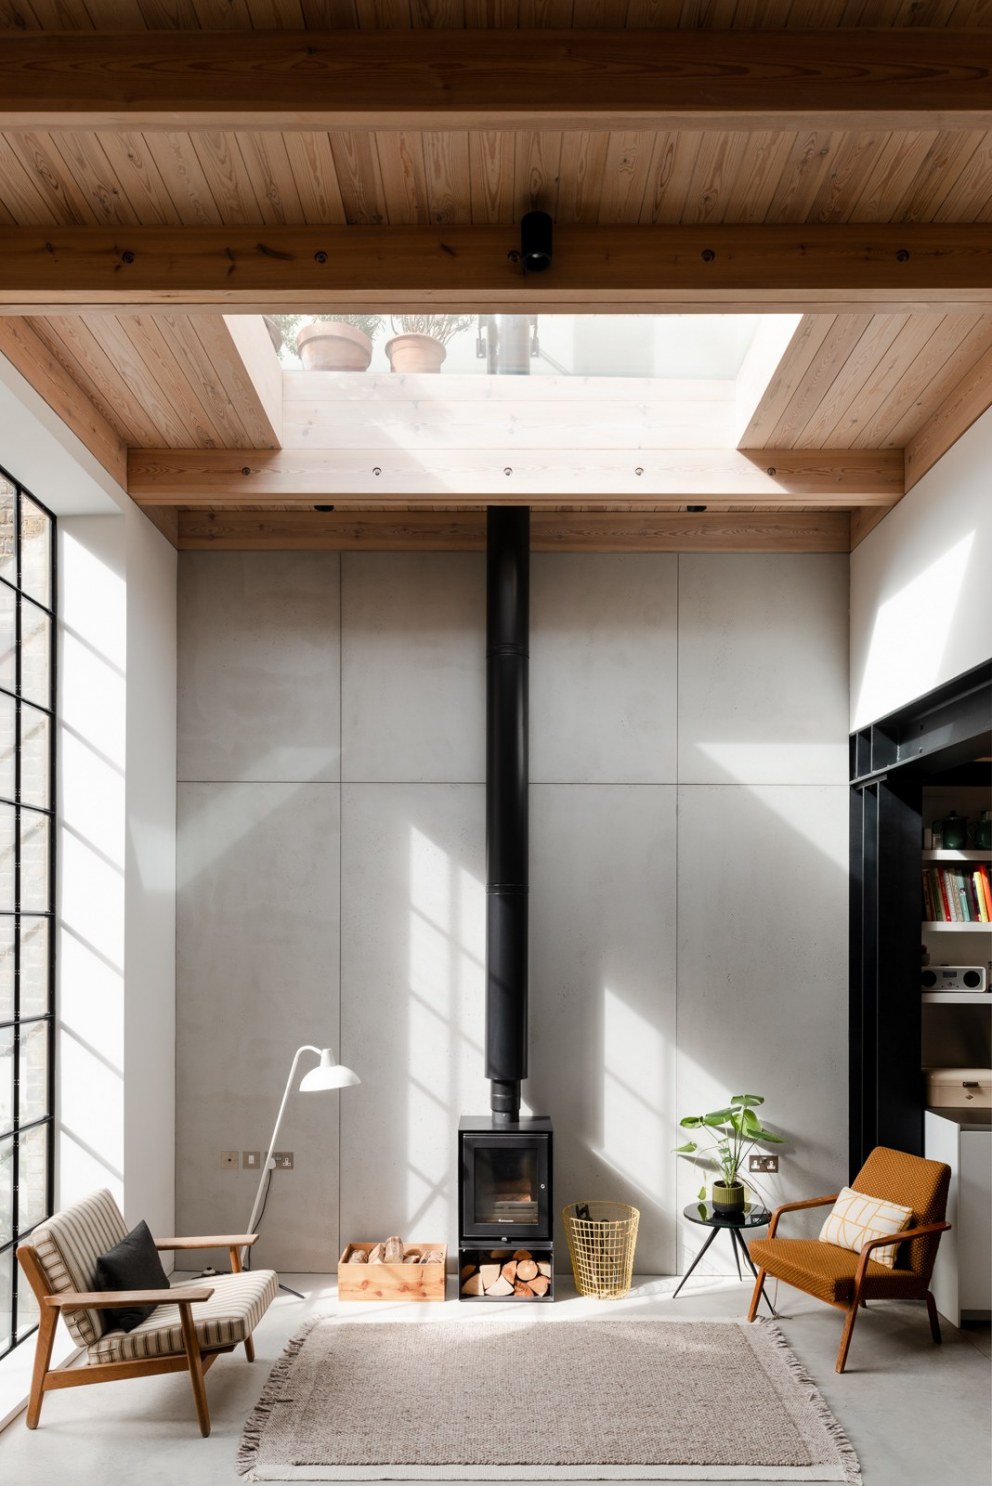 Gin Distillery | Double height living space with oversized crittall window | Interior Designers